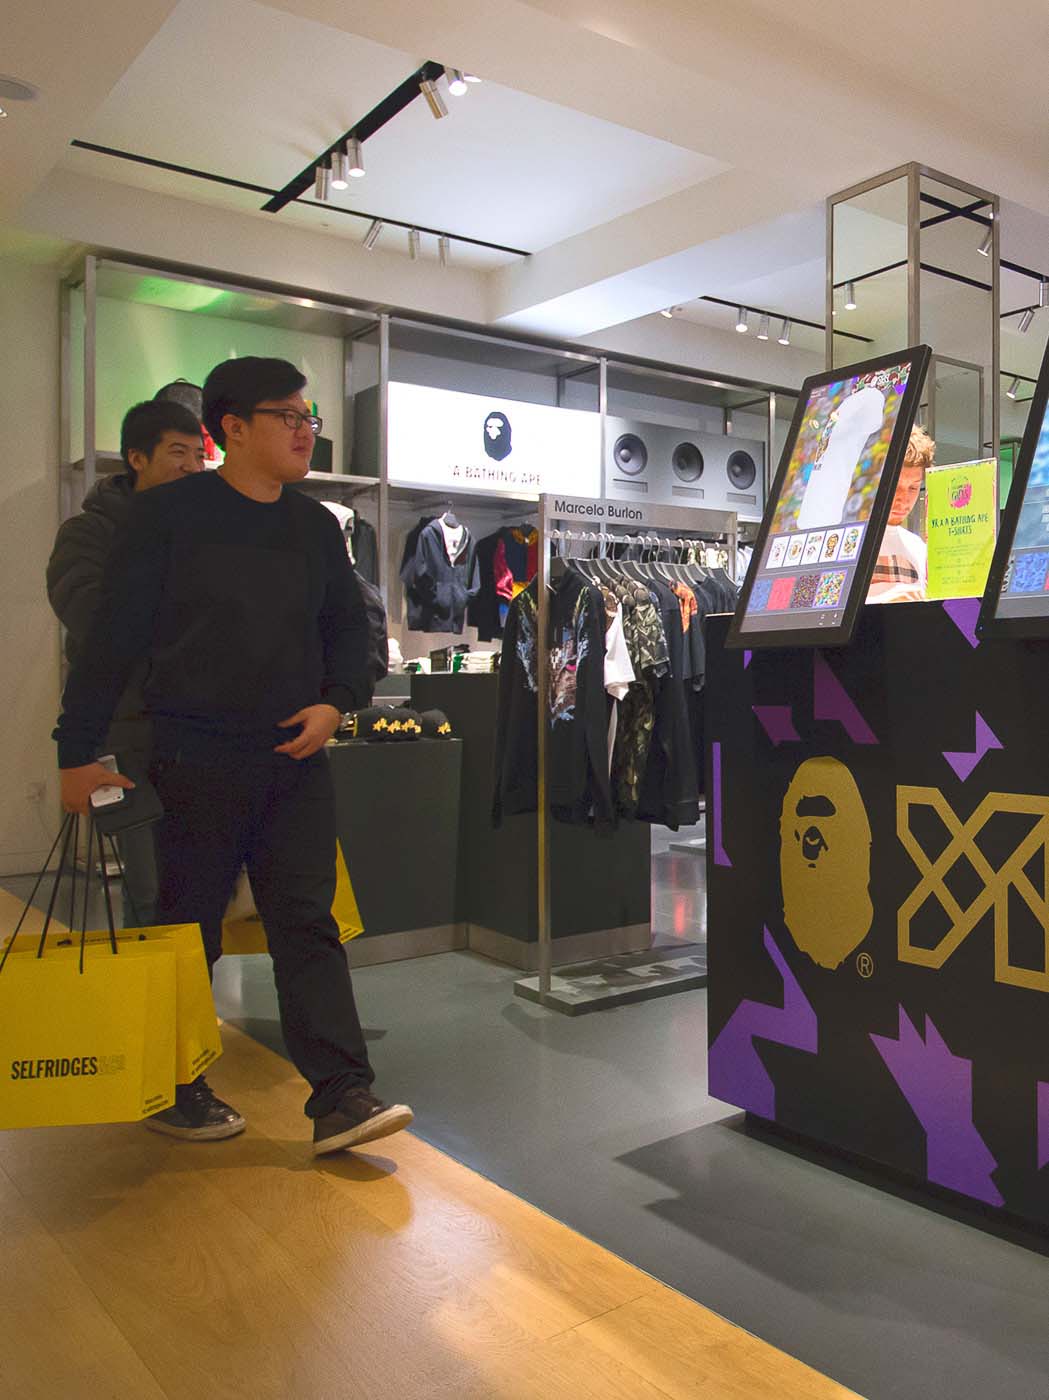 Visitors approaching the YR x A Bathing Ape booth in Selfridges department store in London.